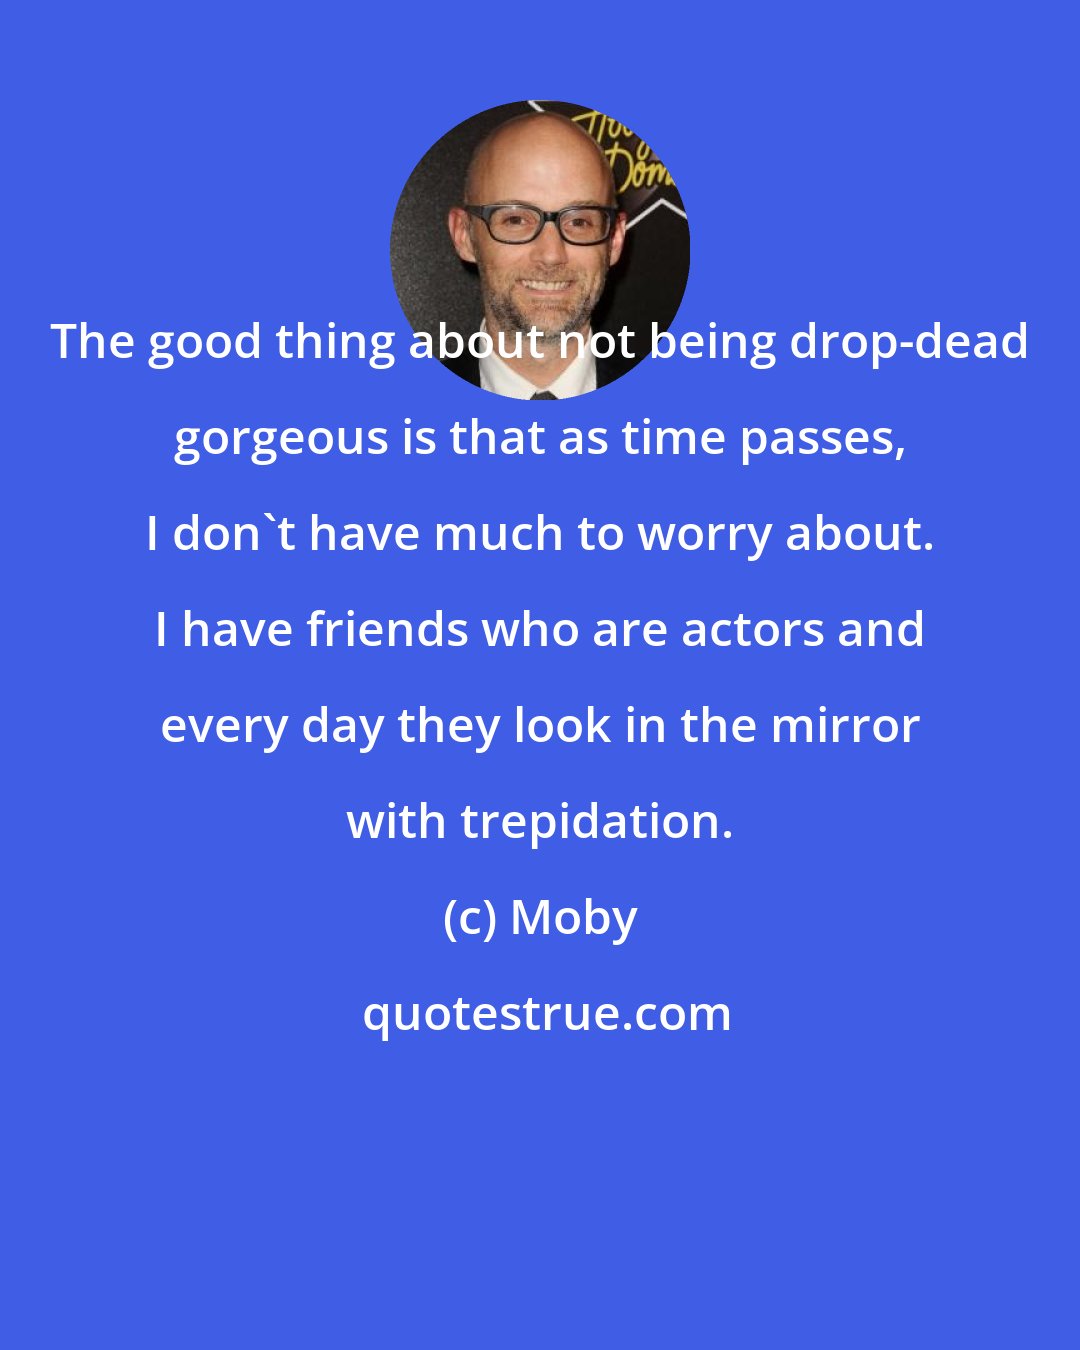 Moby: The good thing about not being drop-dead gorgeous is that as time passes, I don't have much to worry about. I have friends who are actors and every day they look in the mirror with trepidation.